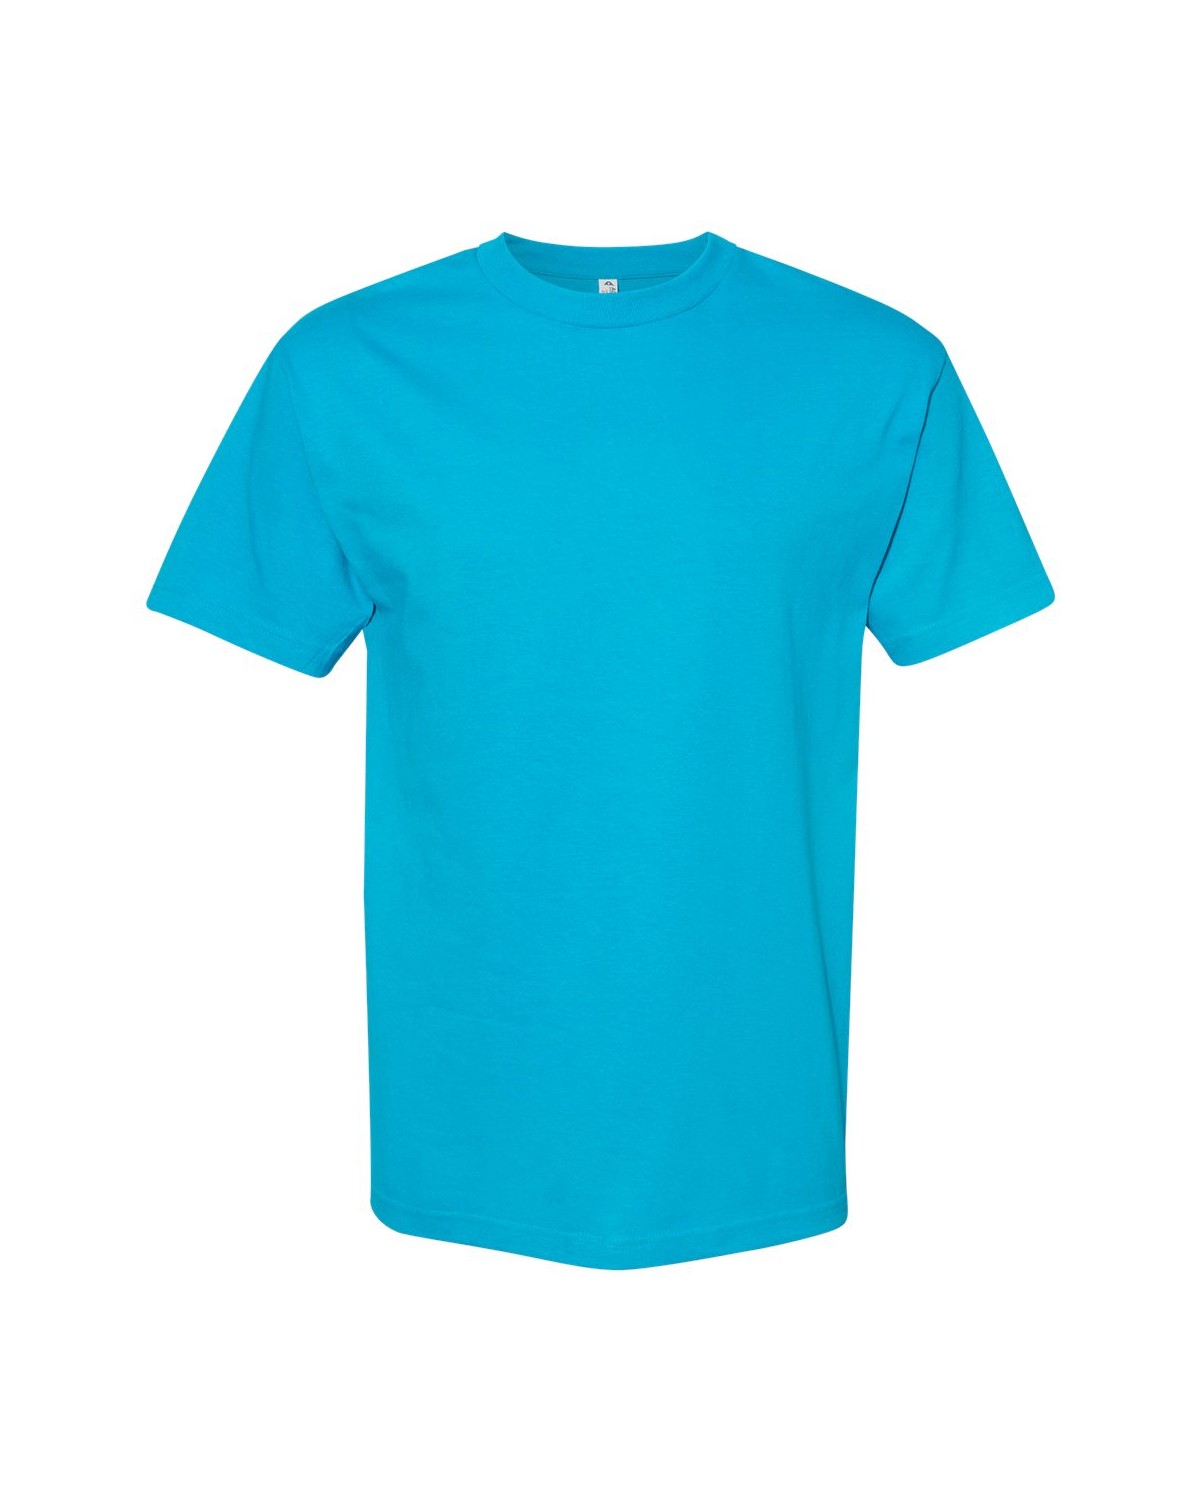 ALSTYLE 1301 Classic T-Shirt